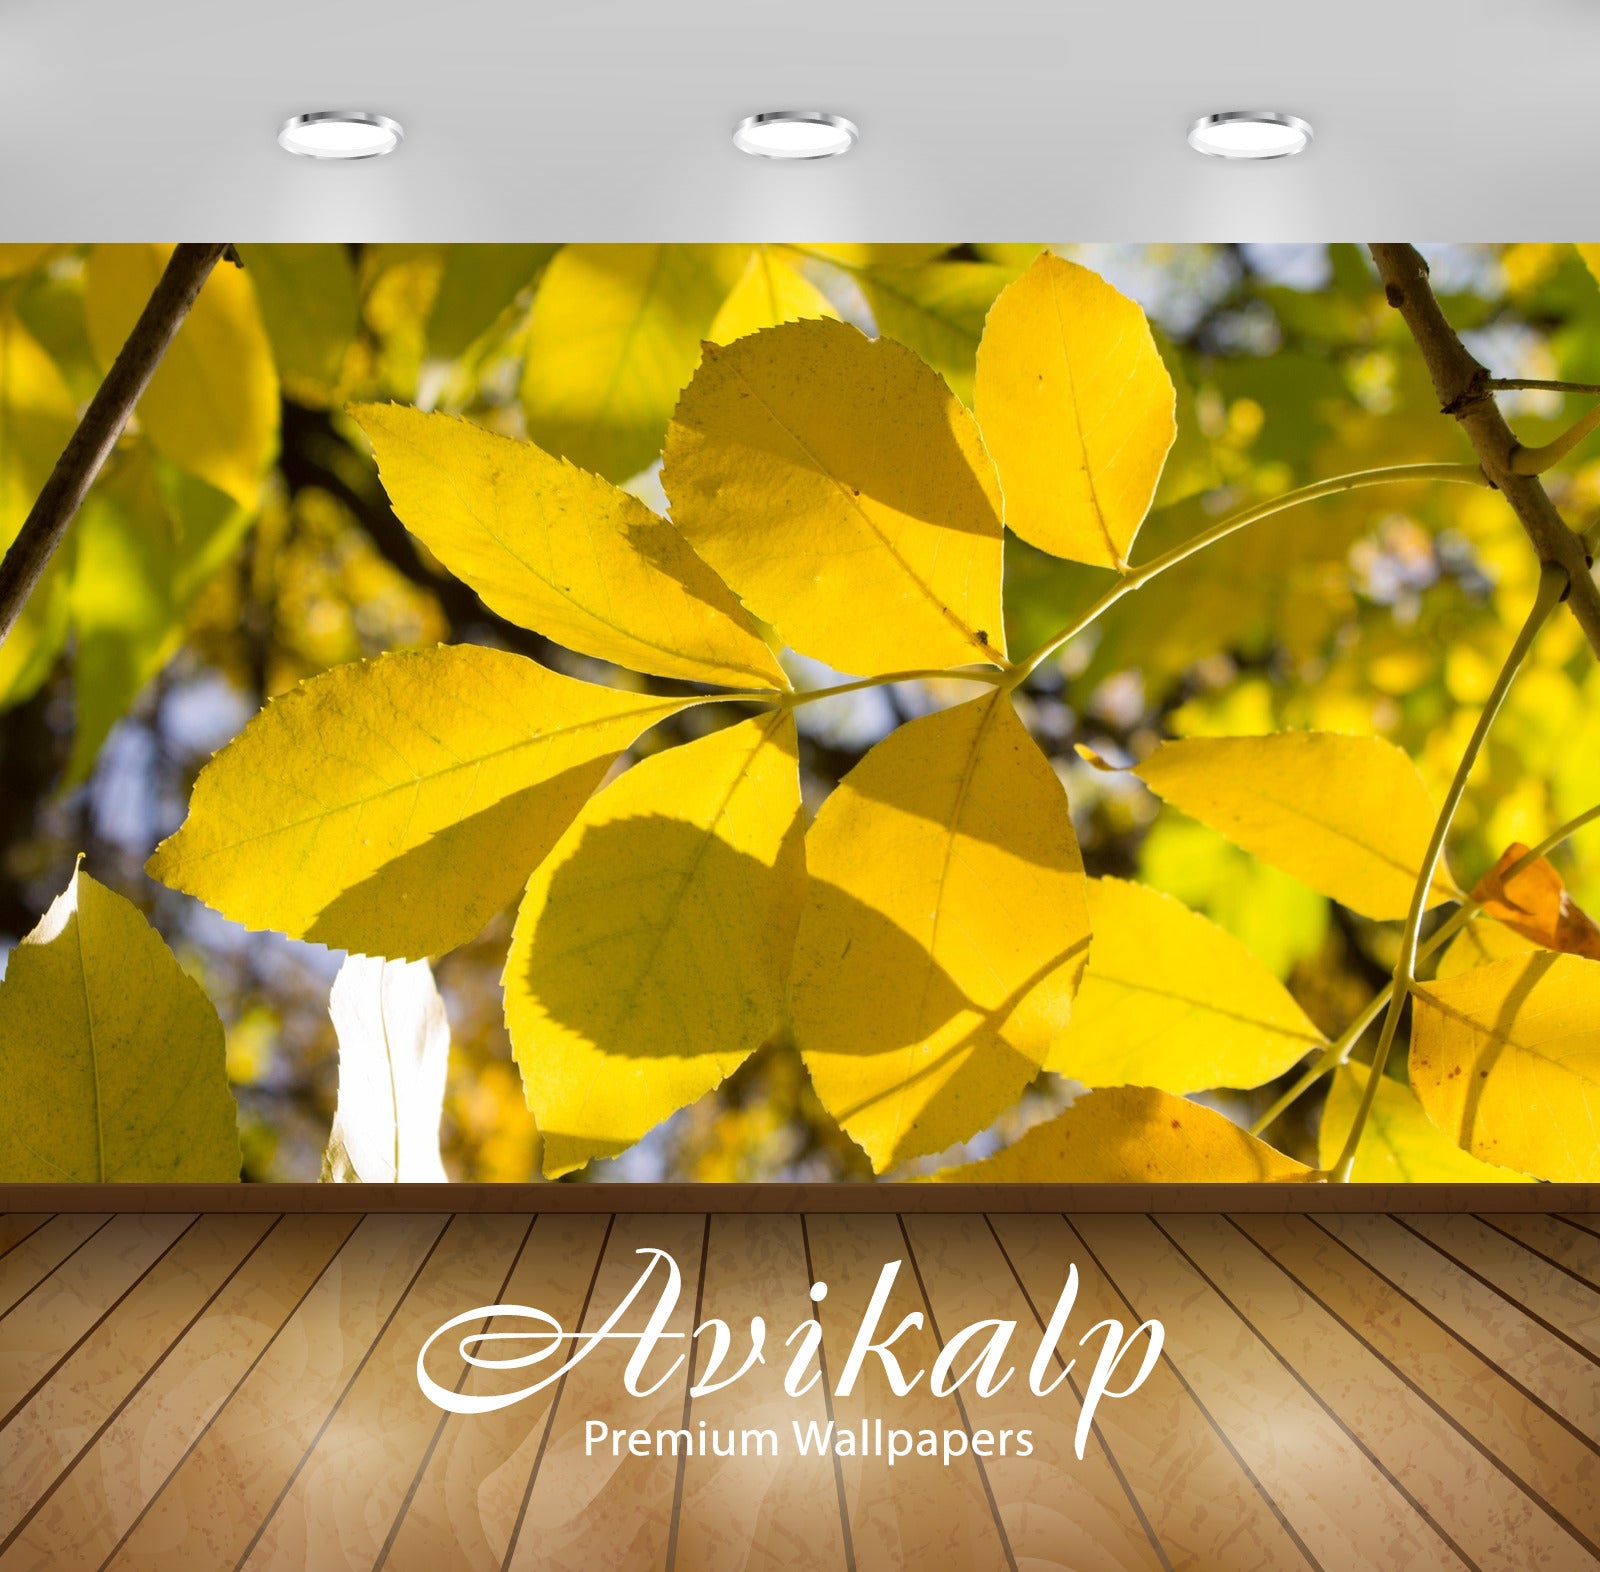 Avikalp Exclusive Awi6742 Yellow Branch In The Sunlight Nature Full HD Wallpapers for Living room, H